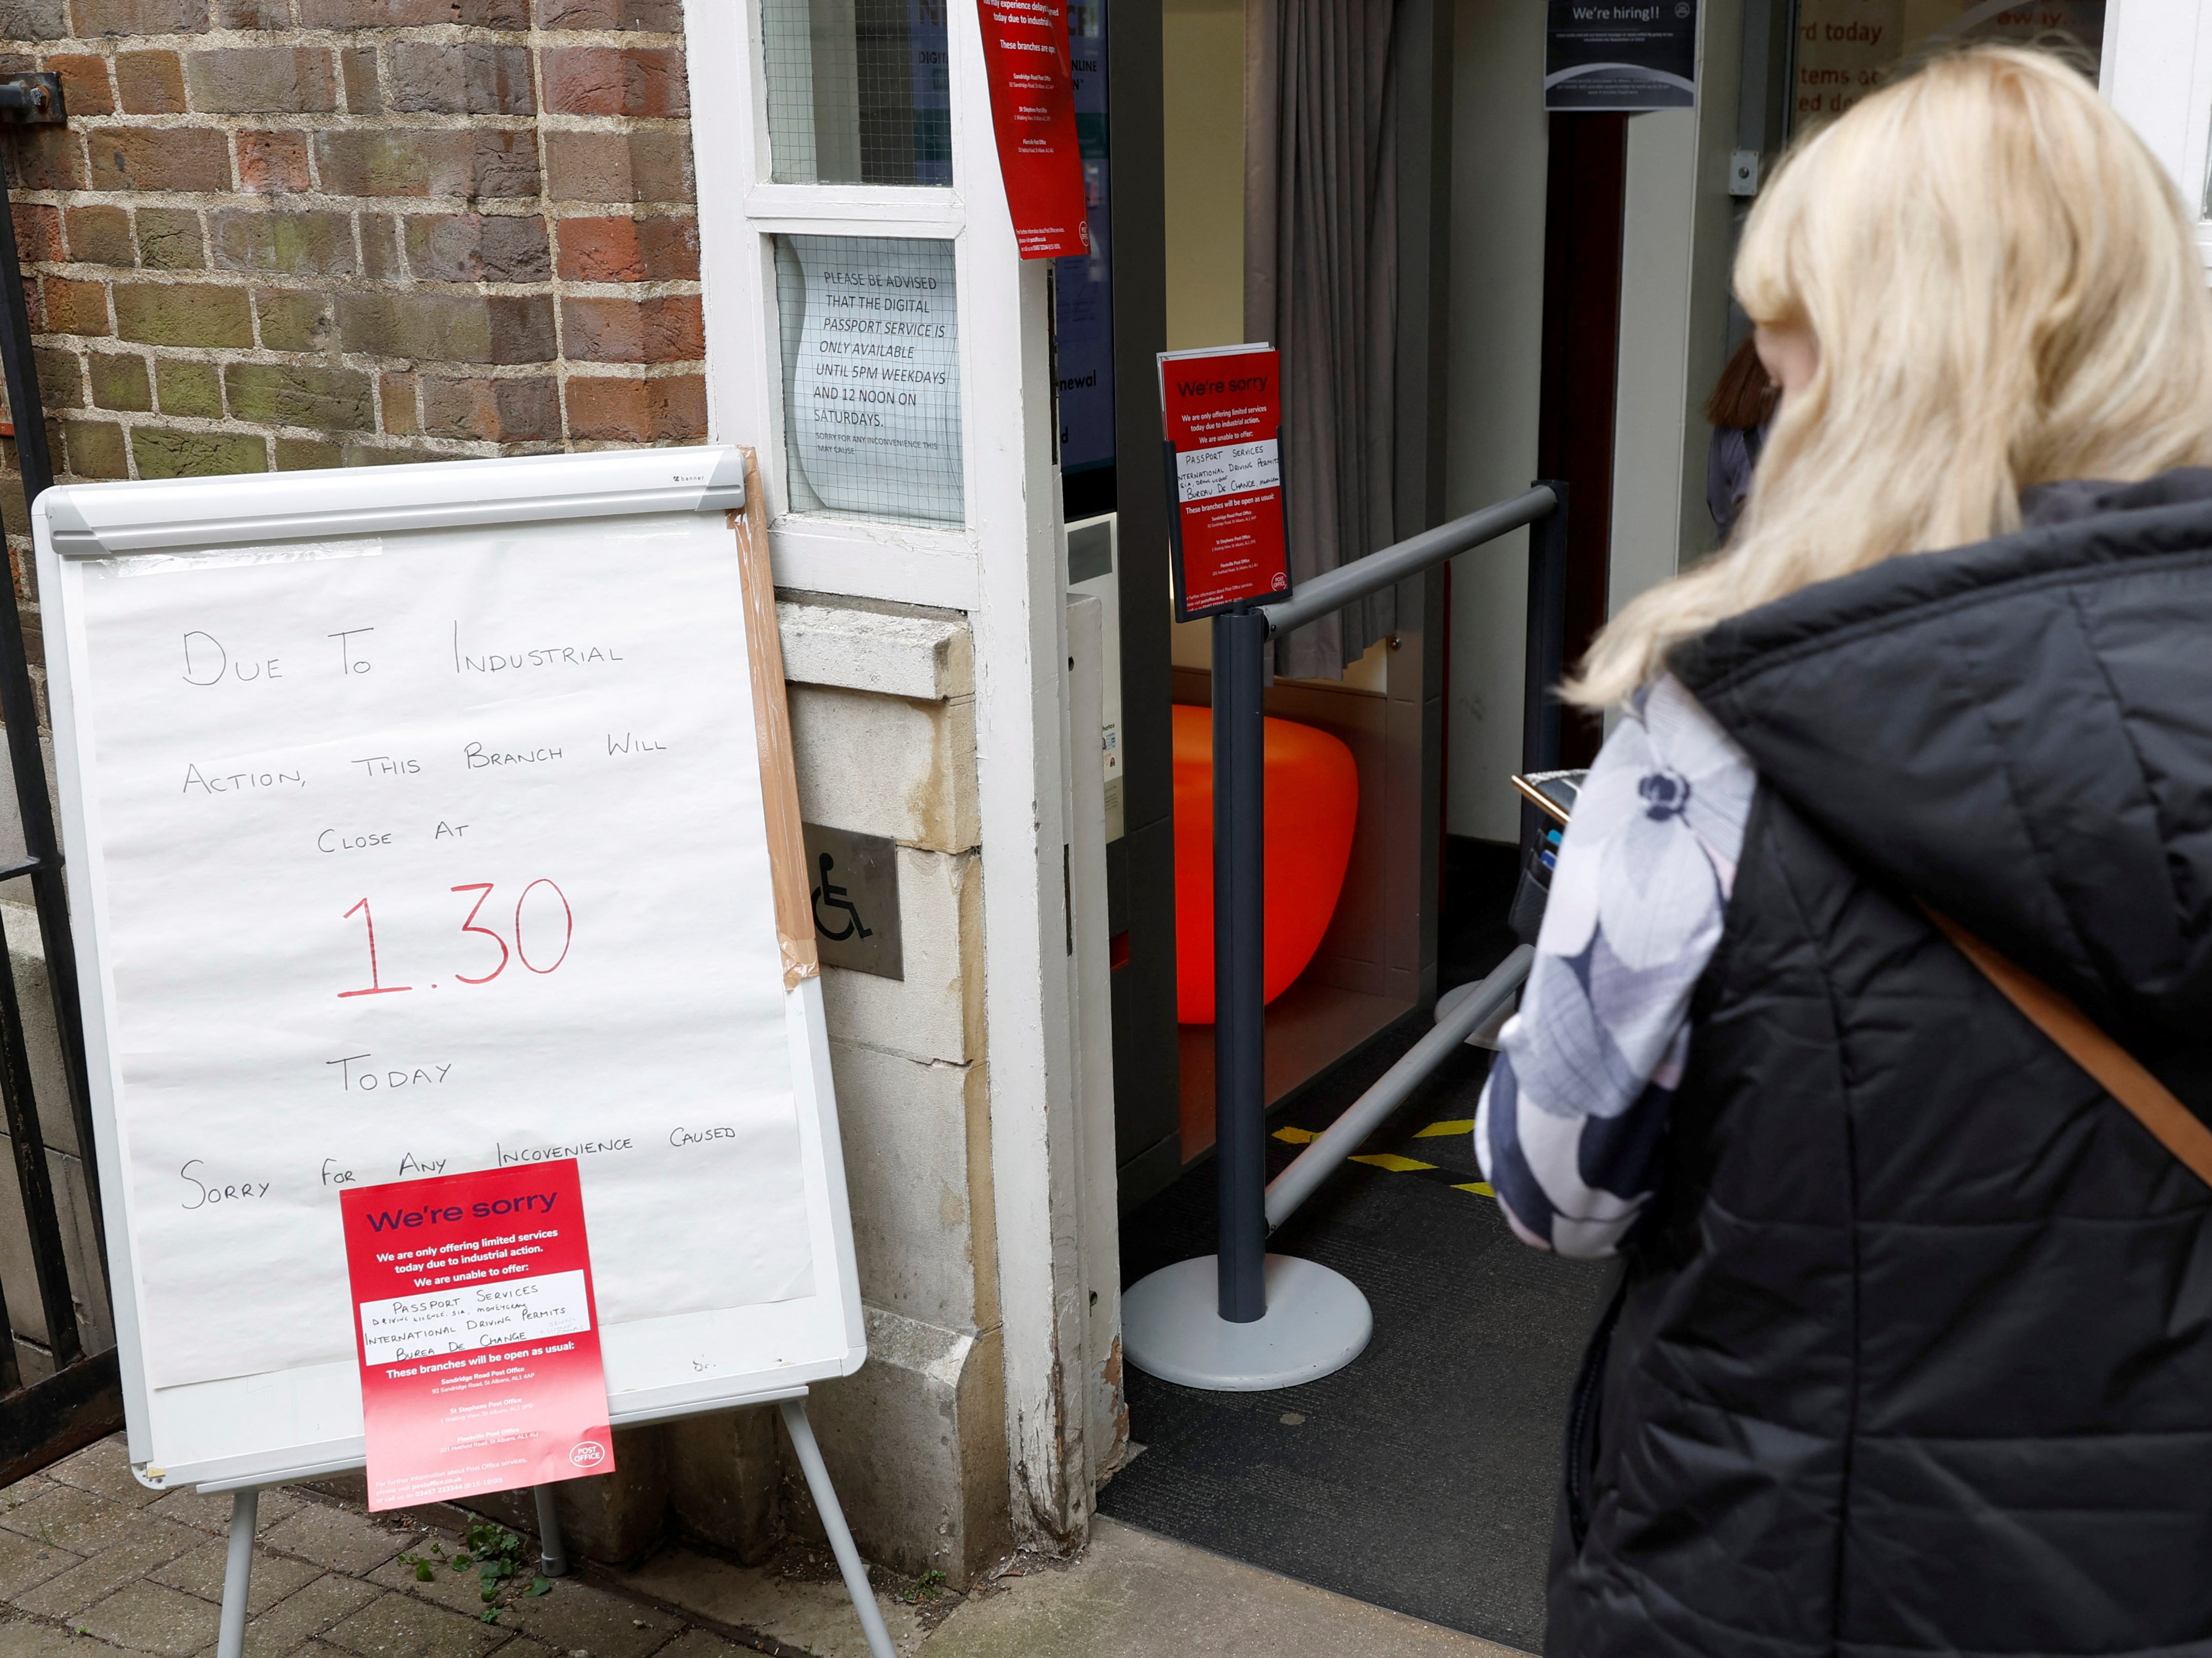 A woman walks past a sign informing customers of a Post Office branch closure due to industrial action, in St Albans, Hertfordshire